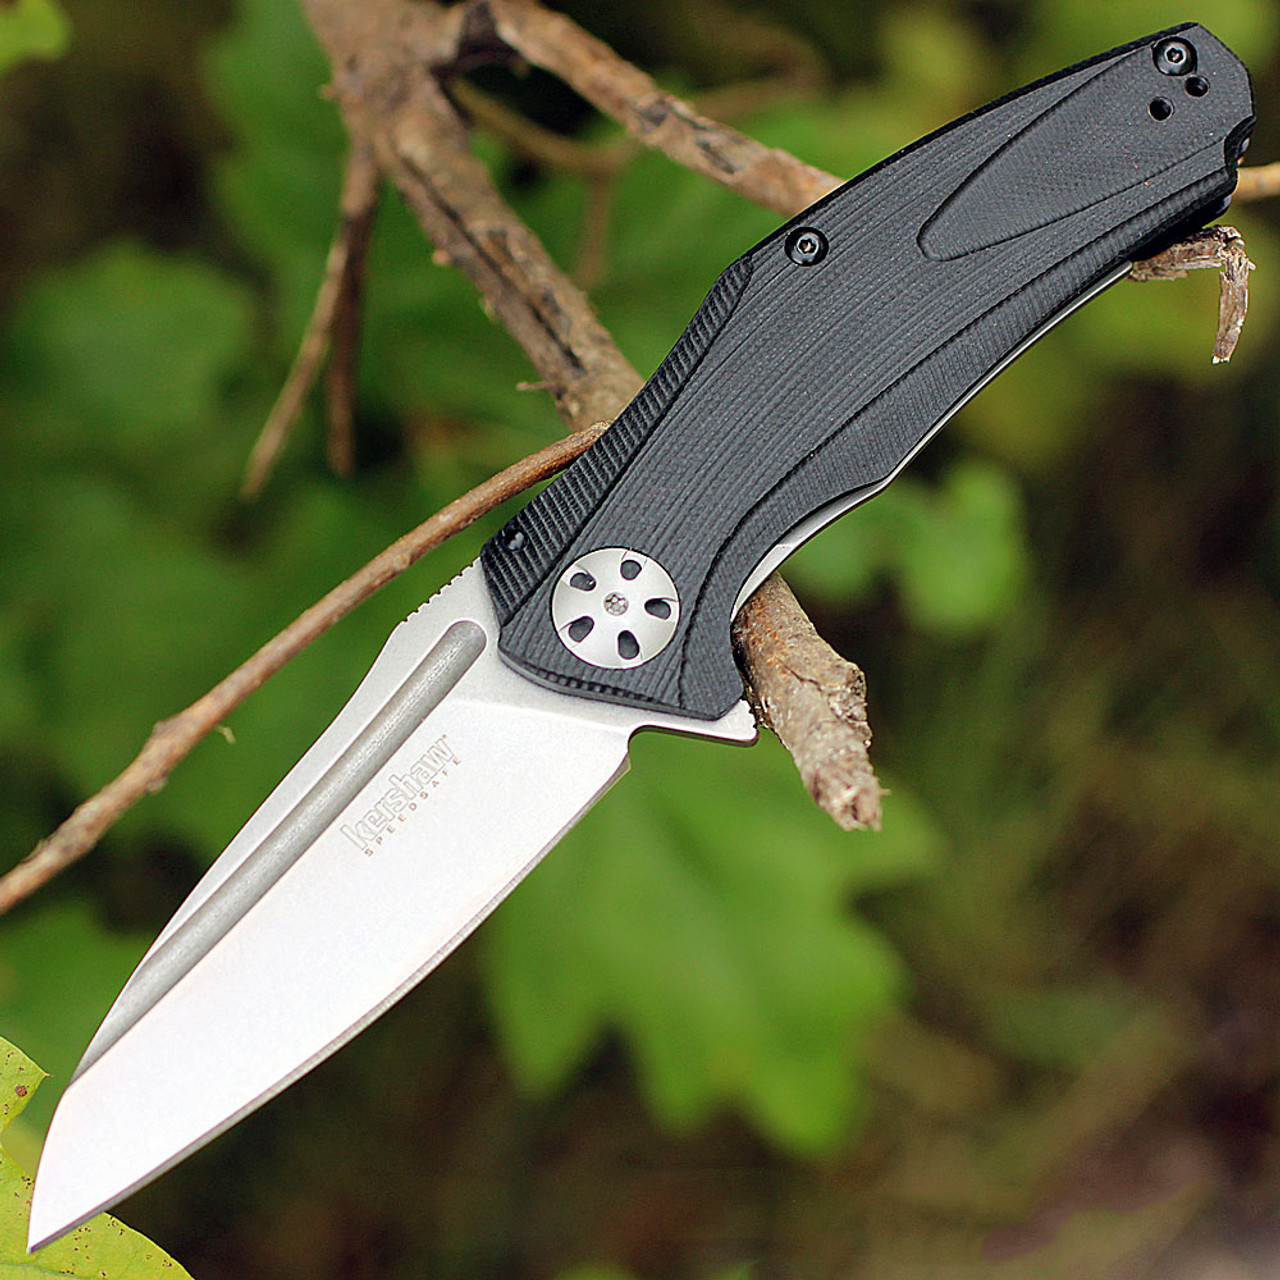 Kershaw Natrix Assisted Opening Knife (7007)- 3.25" Stonewashed 8Cr13MoV Drop Point Blade, Black G-10 Handle